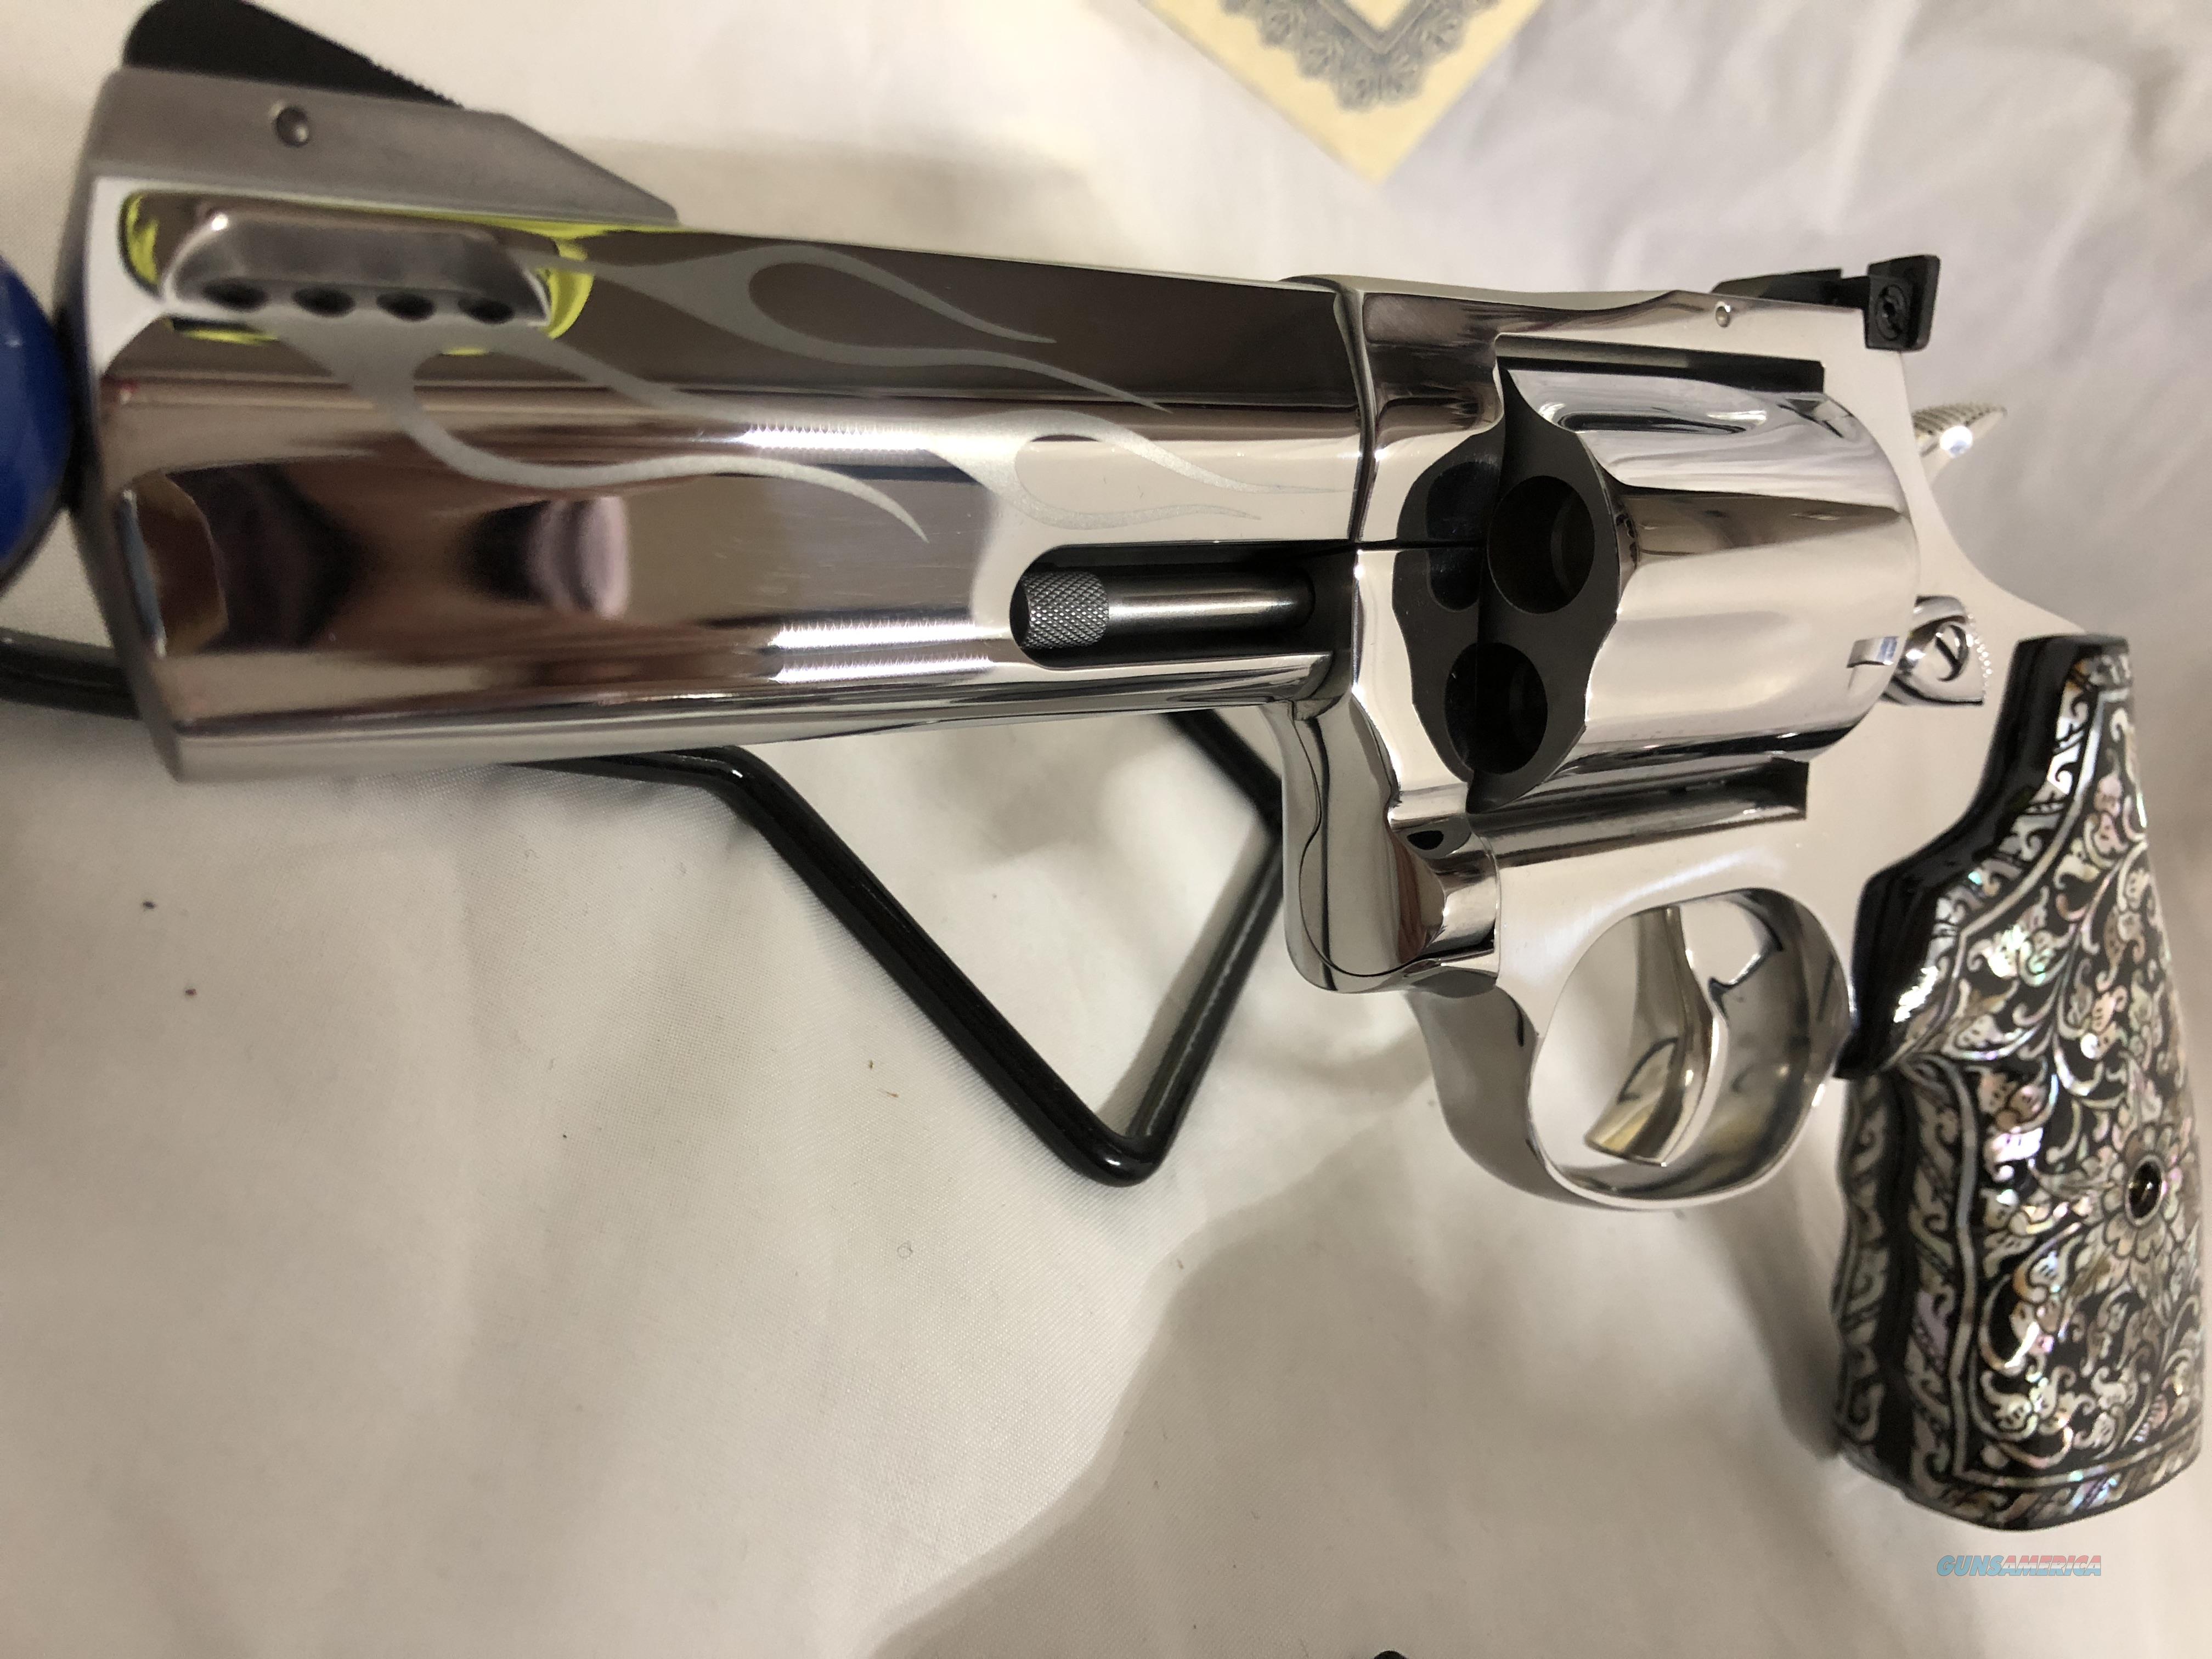 taurus firearms born date serial number search